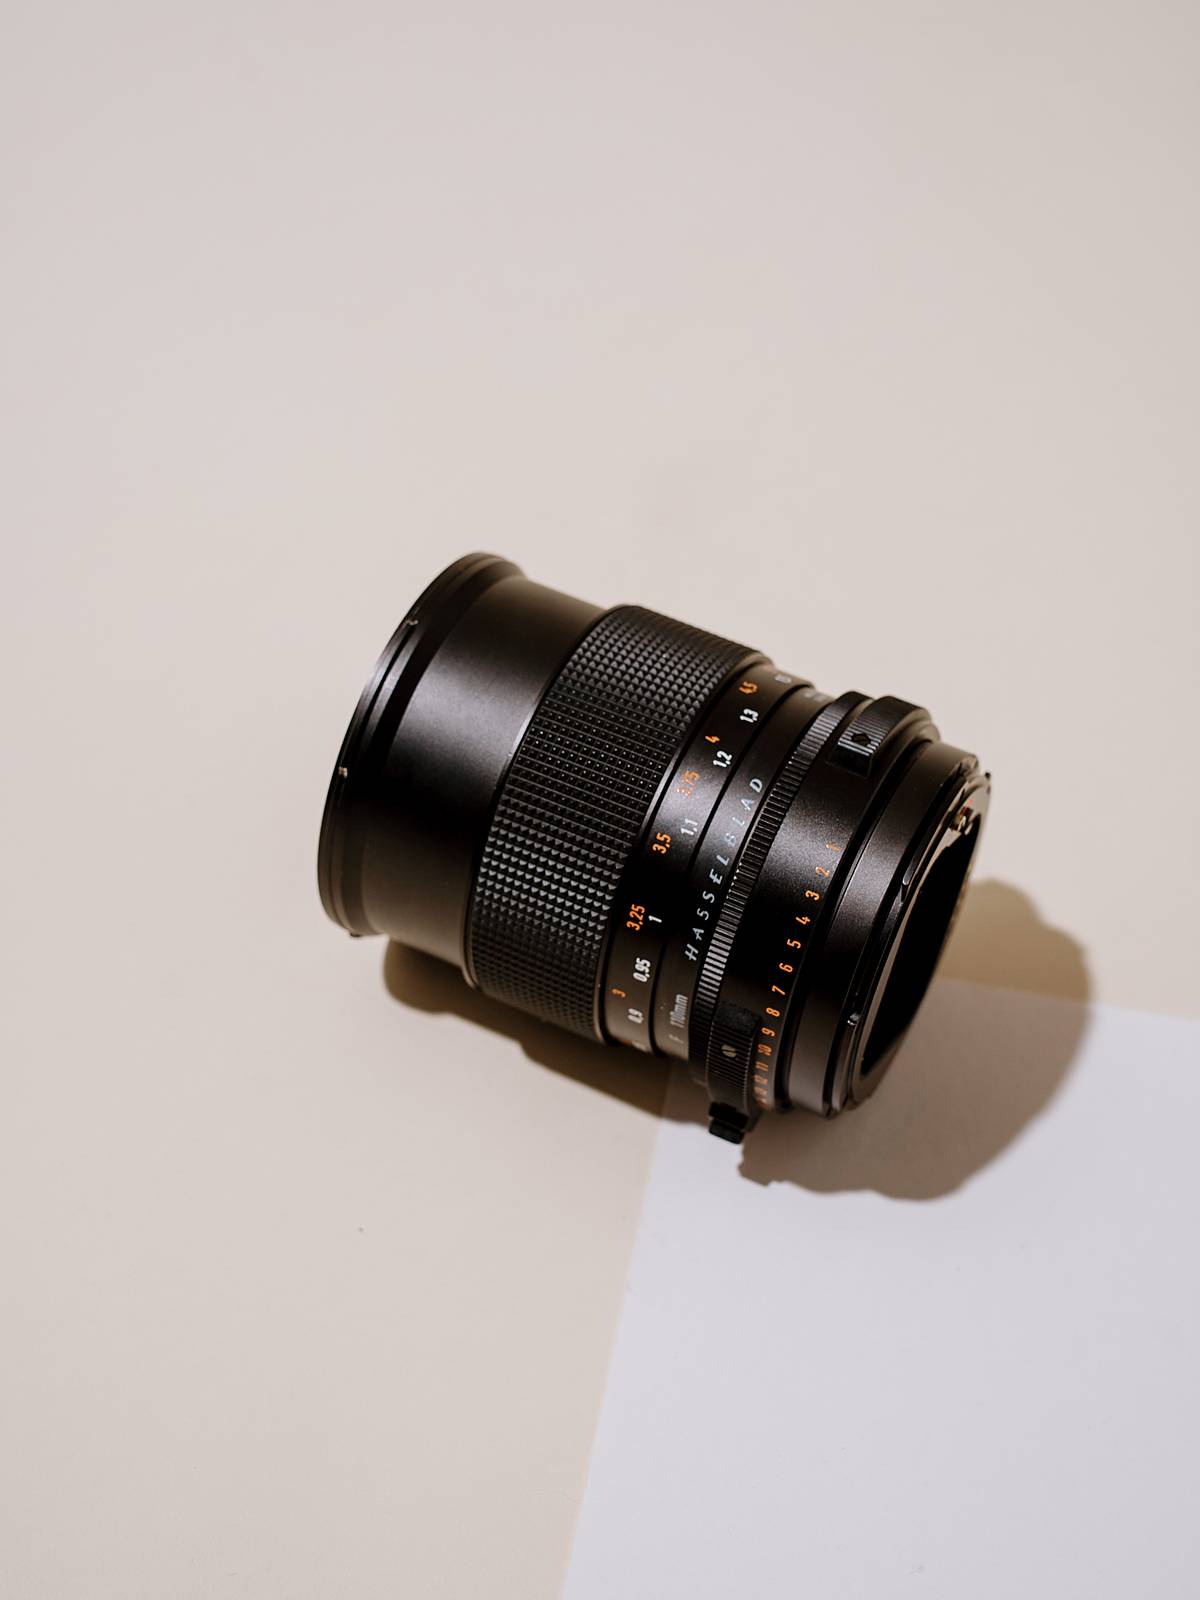 hasselblad FE 110mm fe lens side view with blue lines